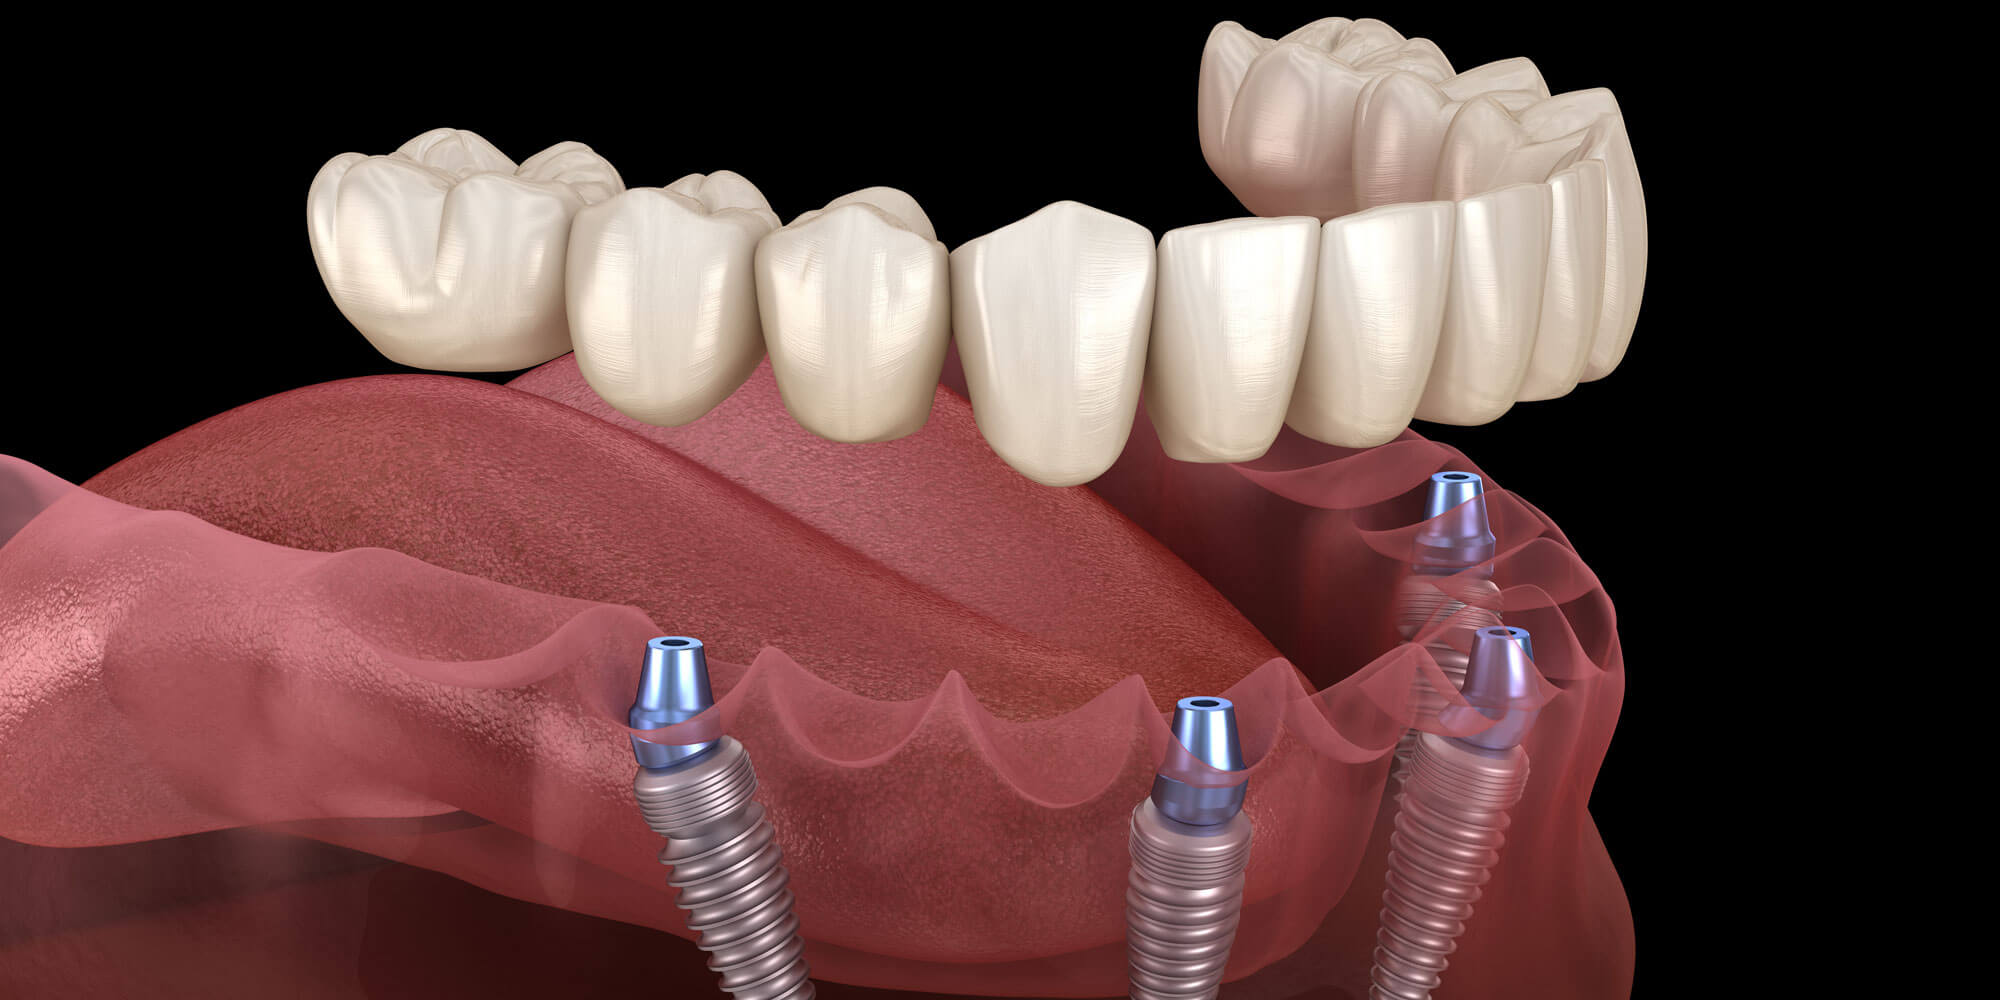 Full Mouth Implants Near Me